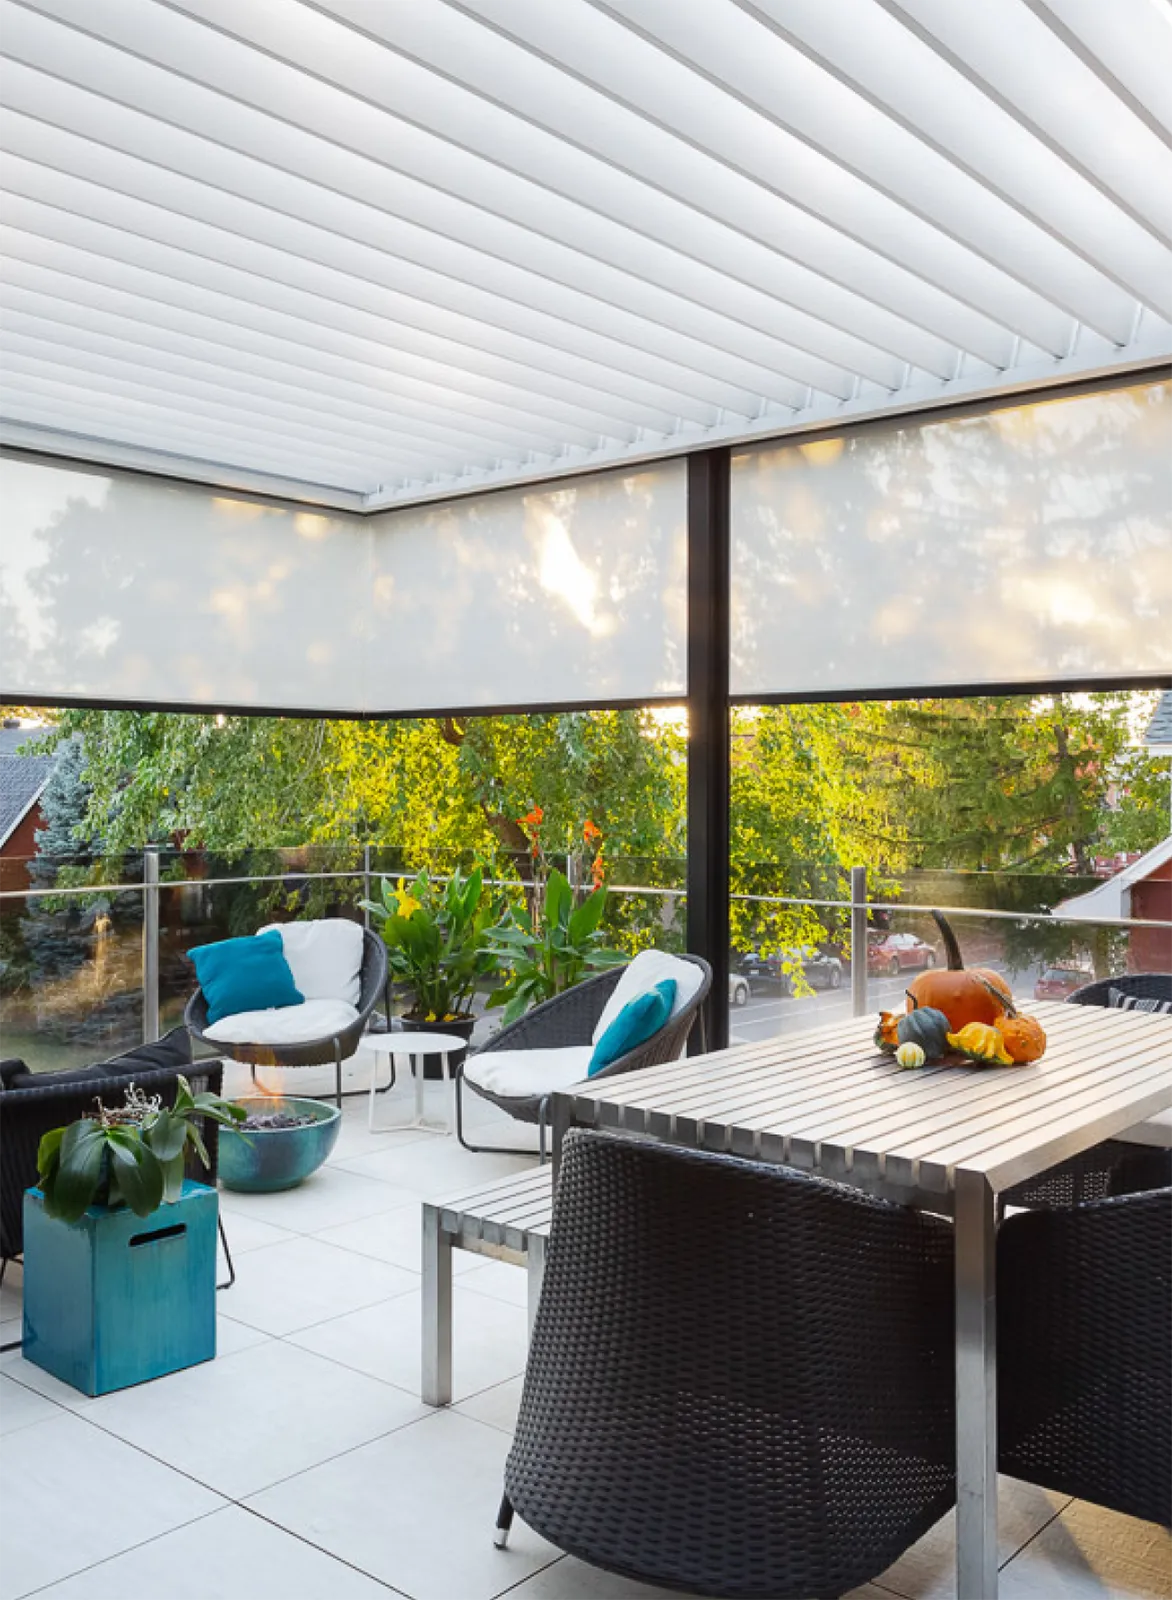 Find out more about Renson's Fixscreen Minimal outdoor blinds product range.